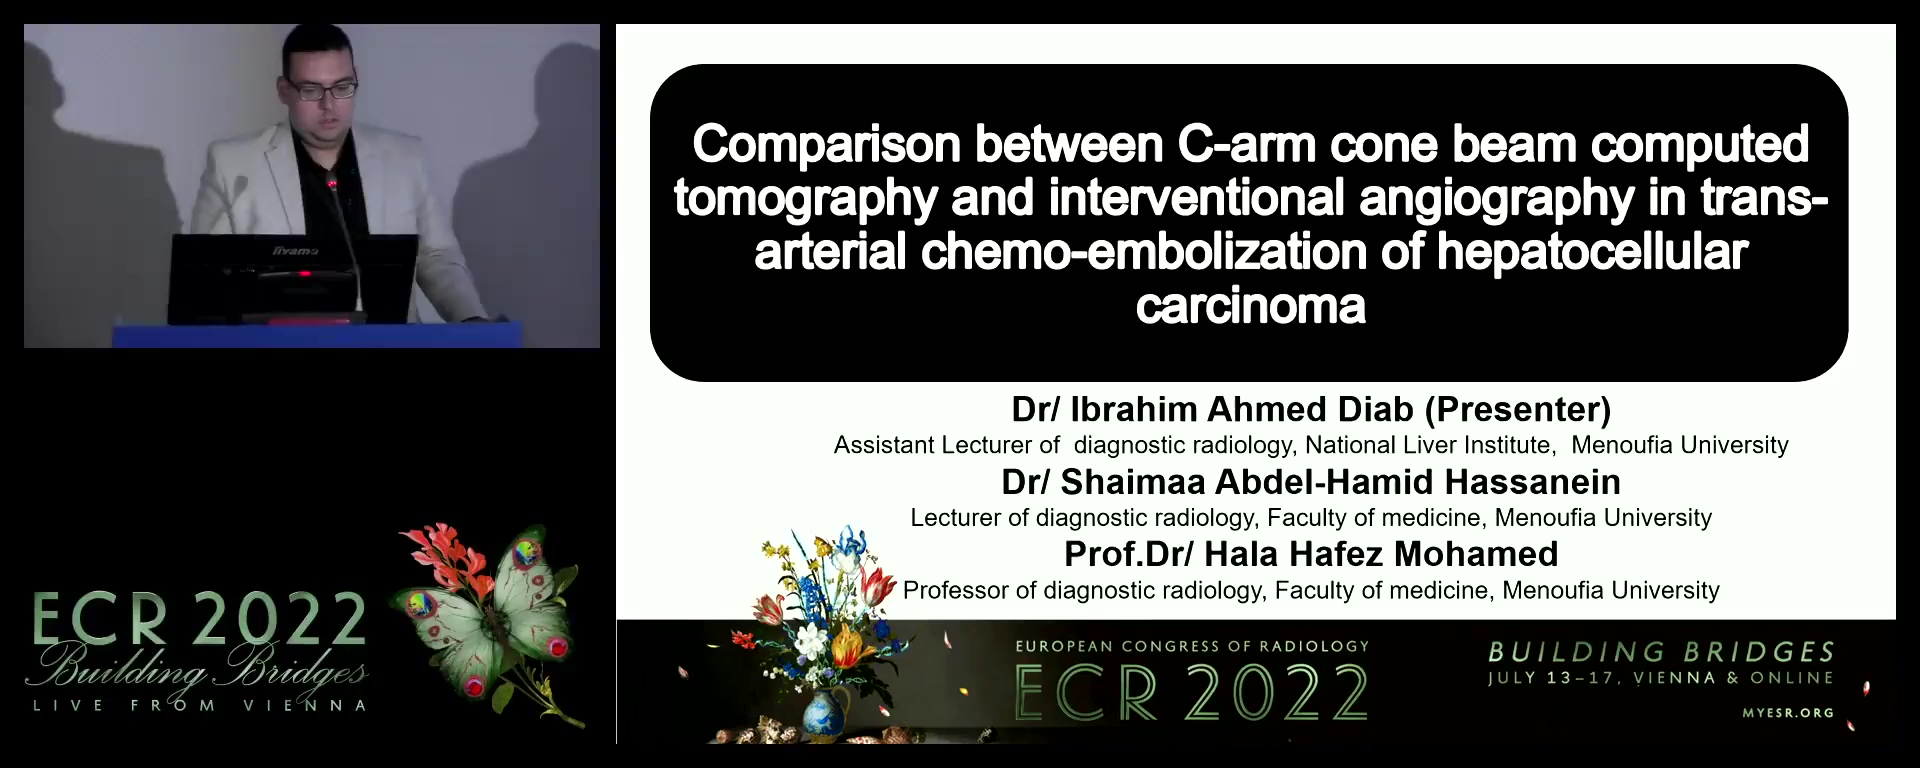 Comparison between C-arm cone beam computed tomography and interventional angiography in trans-arterial chemo-embolisation of hepatocellular carcinoma - Ibrahim Diab, Shebin Elkom / EG